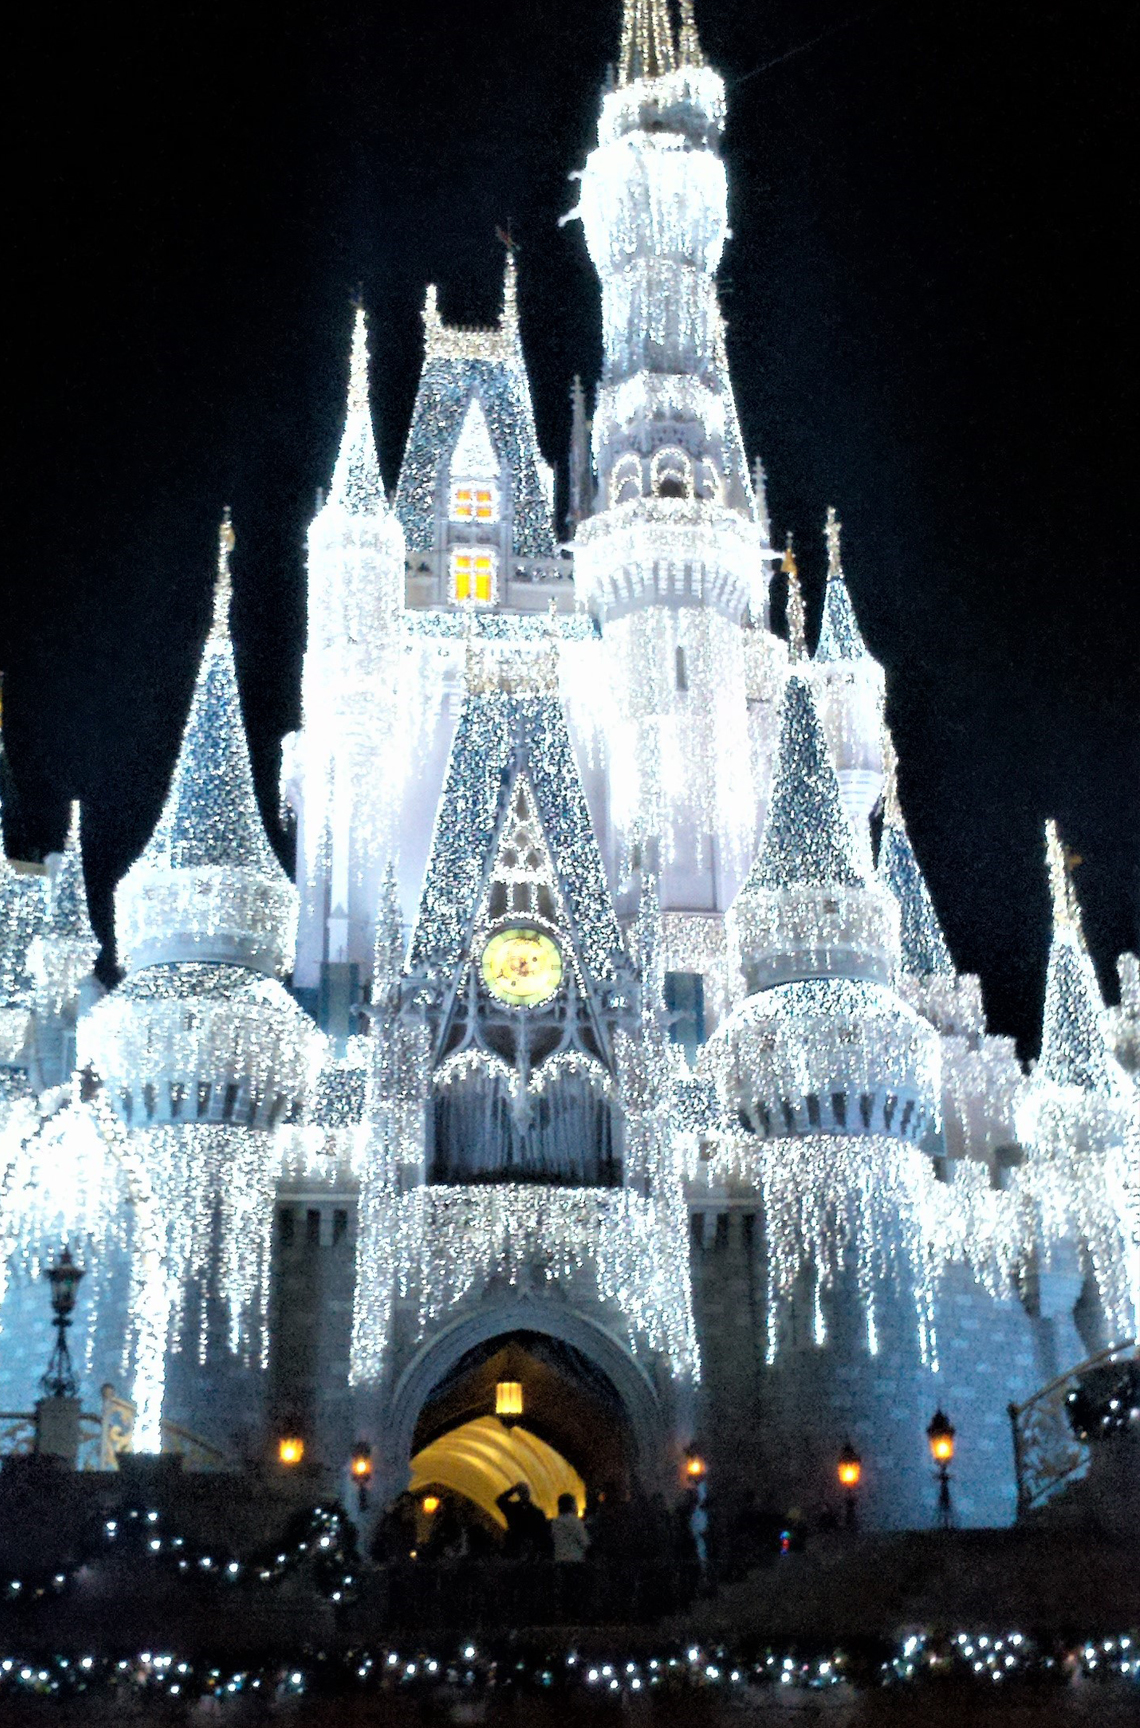 Teri Aitchison enjoying Cinderella's Castle dressed in Holiday finery.